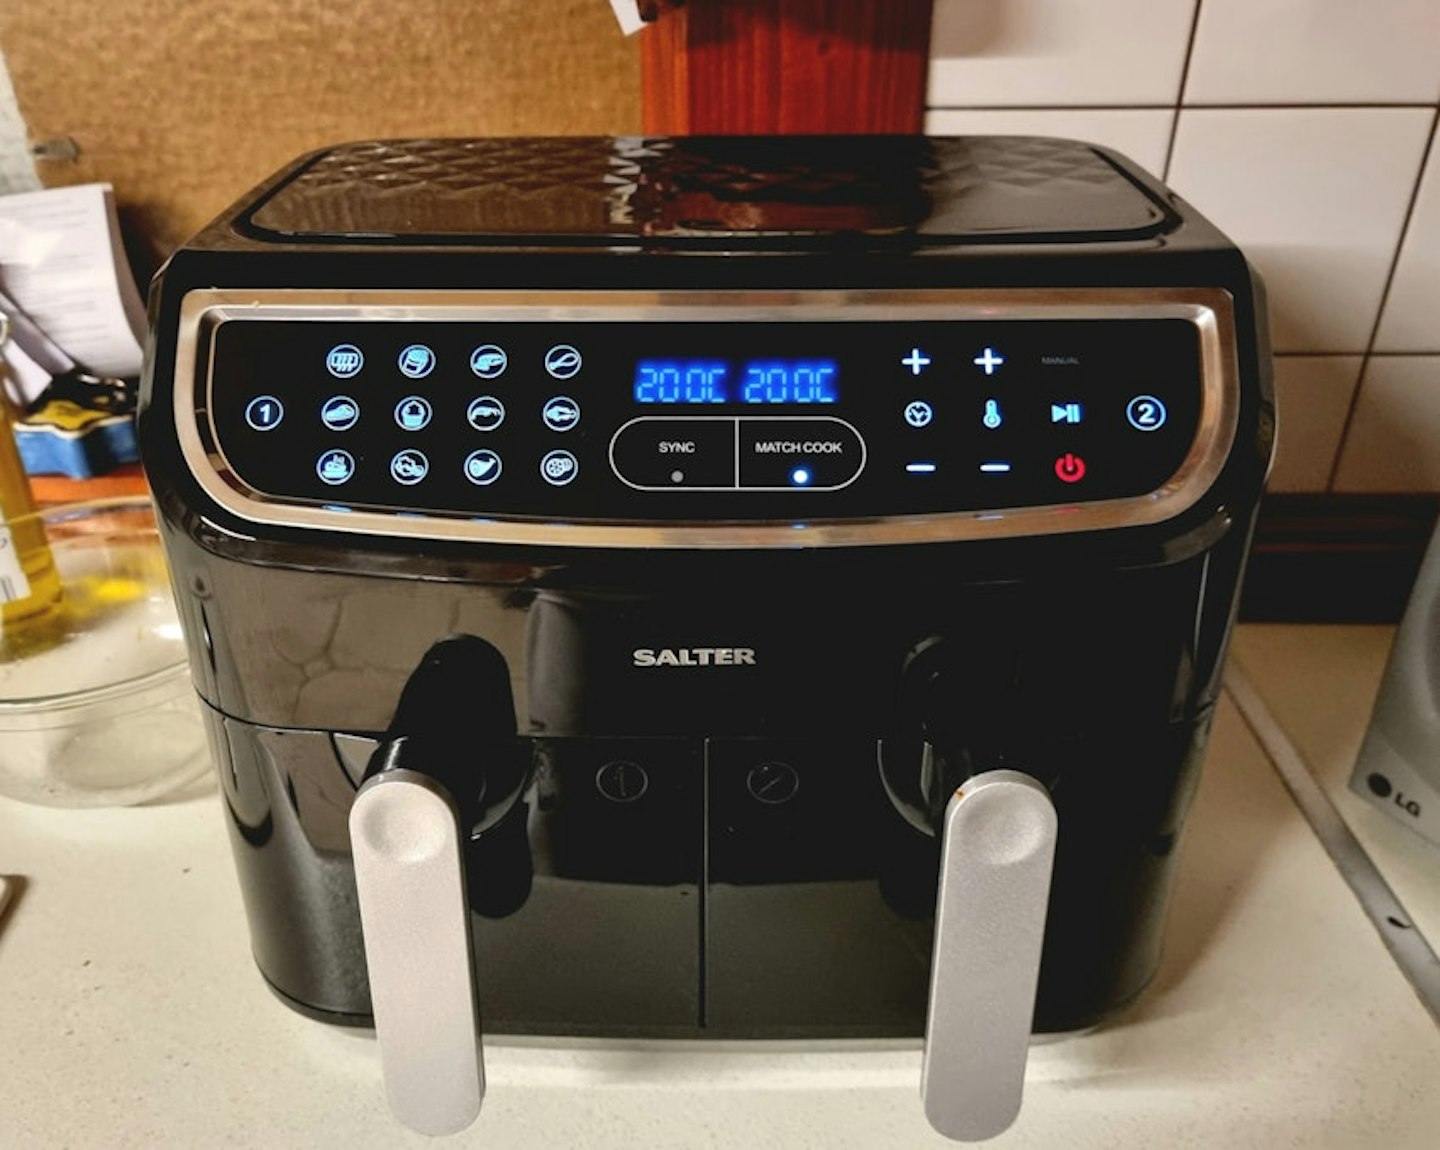 Salter_Dual_Air_Fryer_on_counter